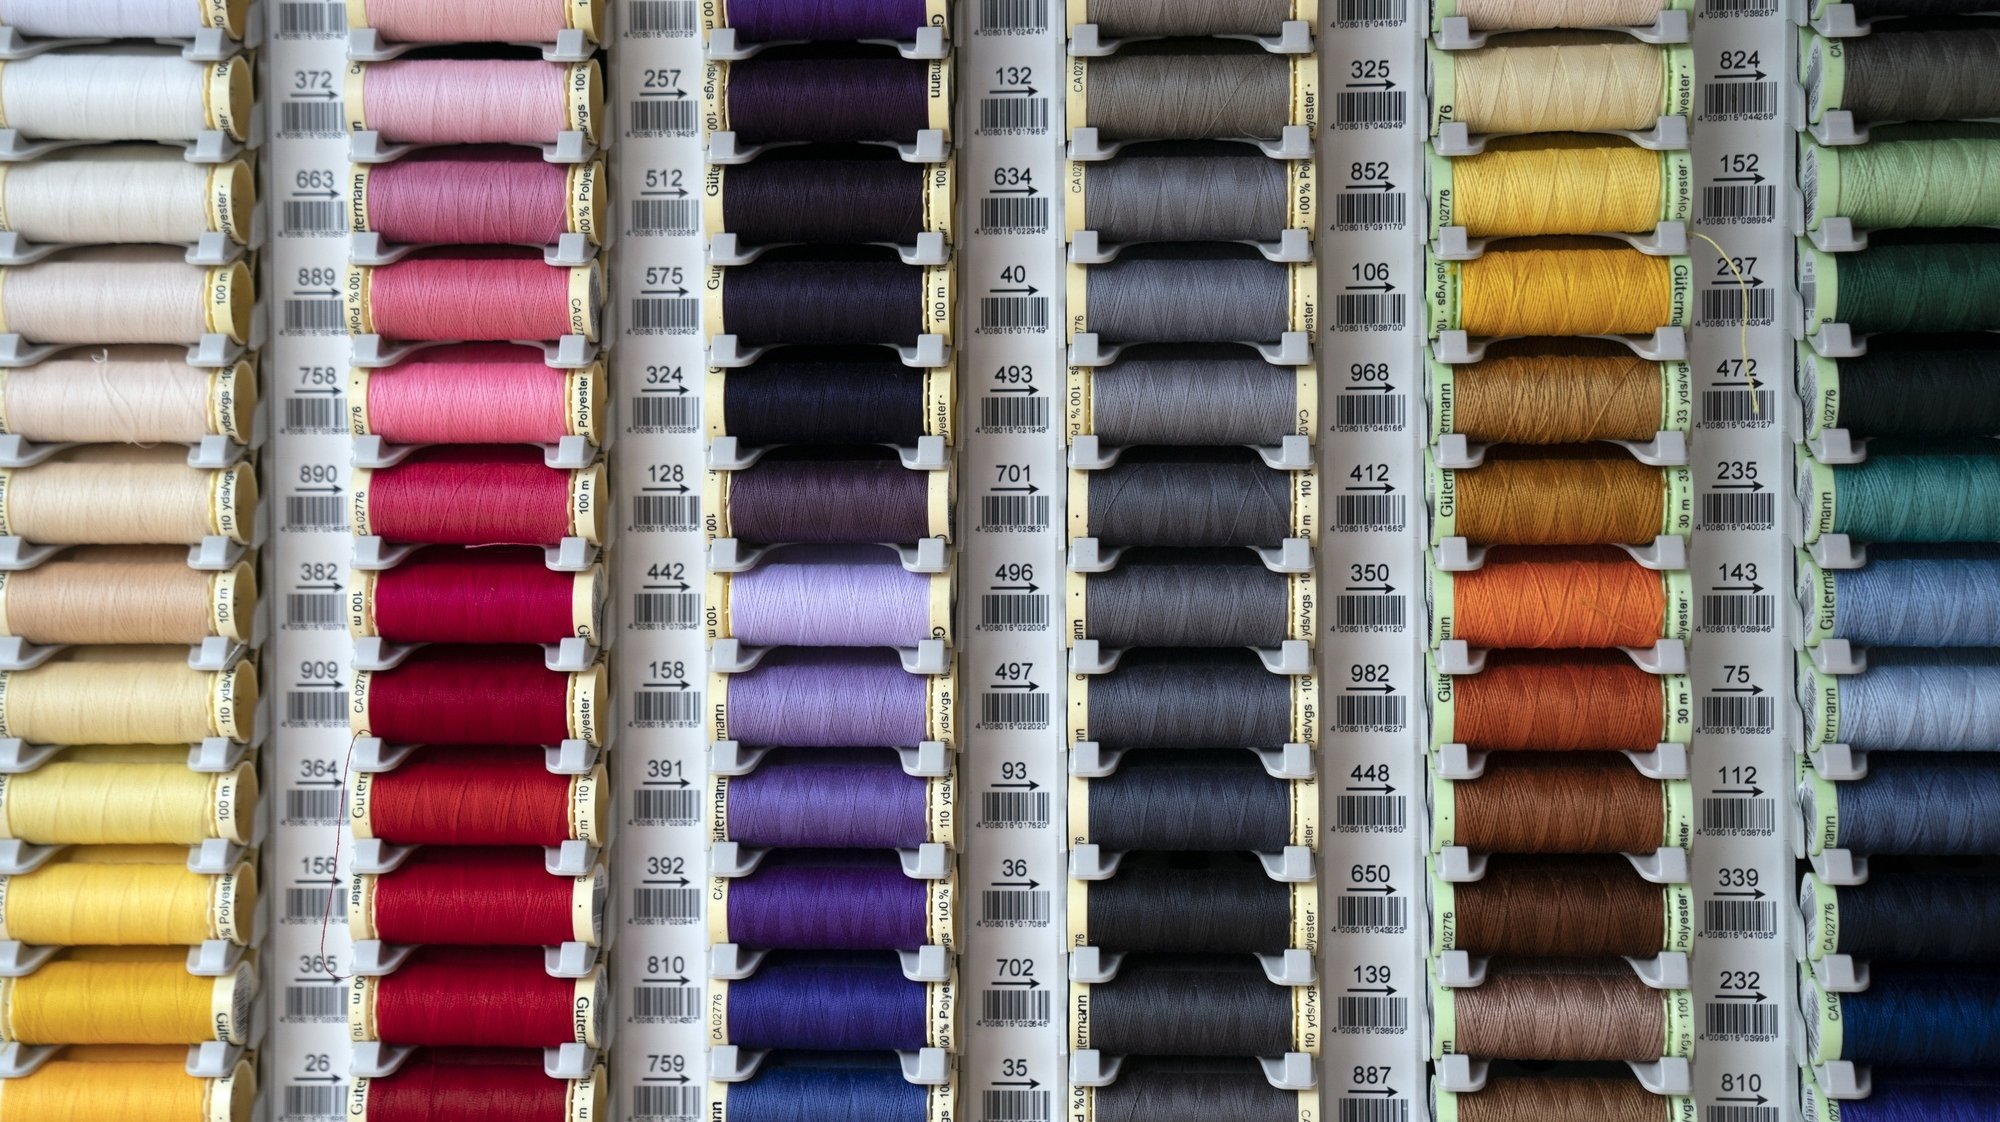 epa08387725 Spools of thread of many colors are on display at the ScrubHub in Central London, Britain, 27 April 2020. The ScrubHub is a grassroots organization staffed by volunteers than encourages Britons to make surgical scrubs for medical workers of the United Kingdom&#039;s National Health Service (NHS) who may need them amid the ongoing pandemic of the COVID-19 disease caused by the SARS-CoV-2 coronavirus.  EPA/WILL OLIVER